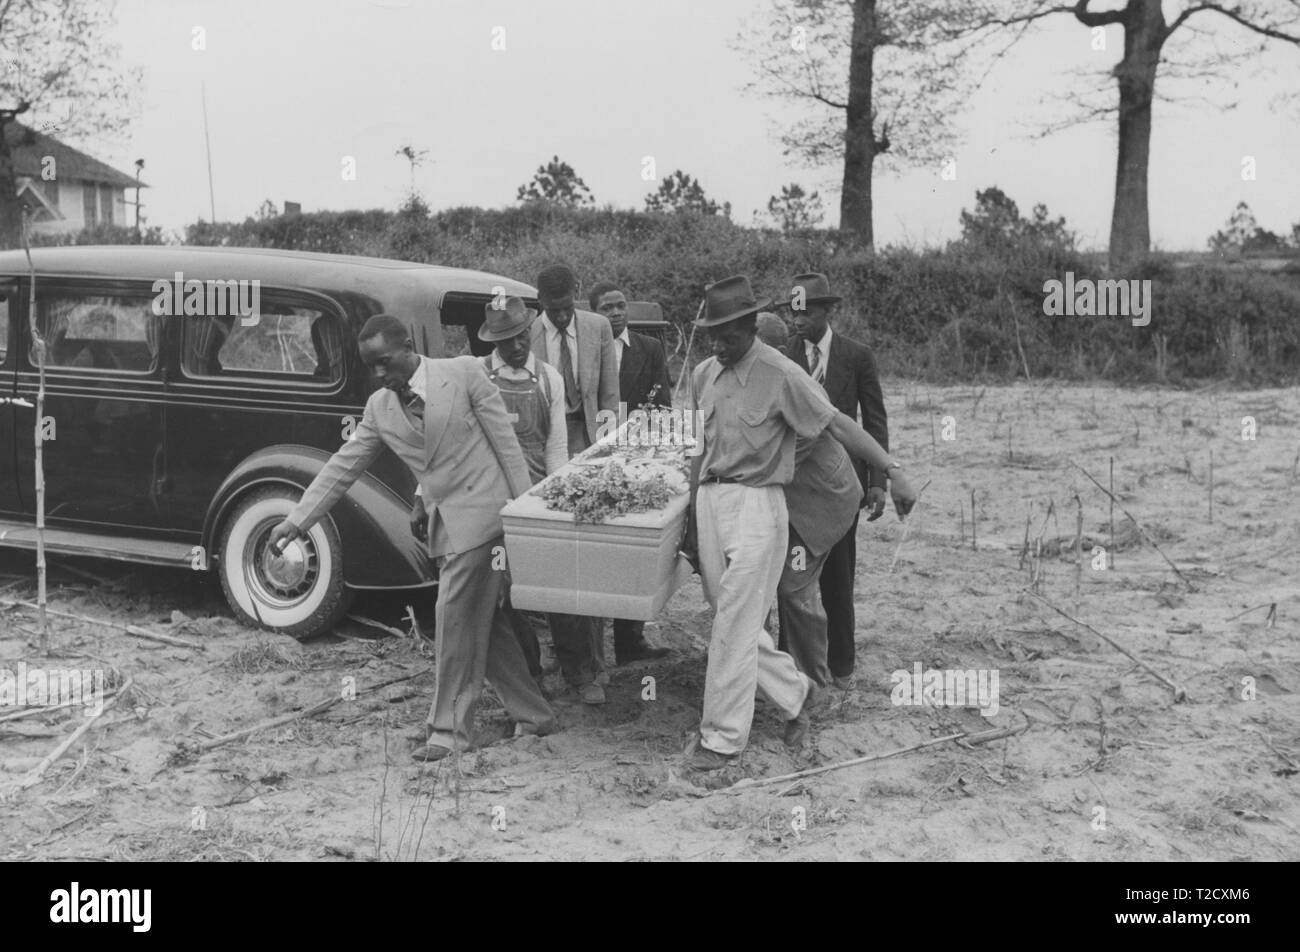 Pallbearers carry the casket of a nineteen year old African-American man who died while working at a saw mill during a funeral in Heard County, Georgia, United States, May, 1941. From the New York Public Library. () Stock Photo